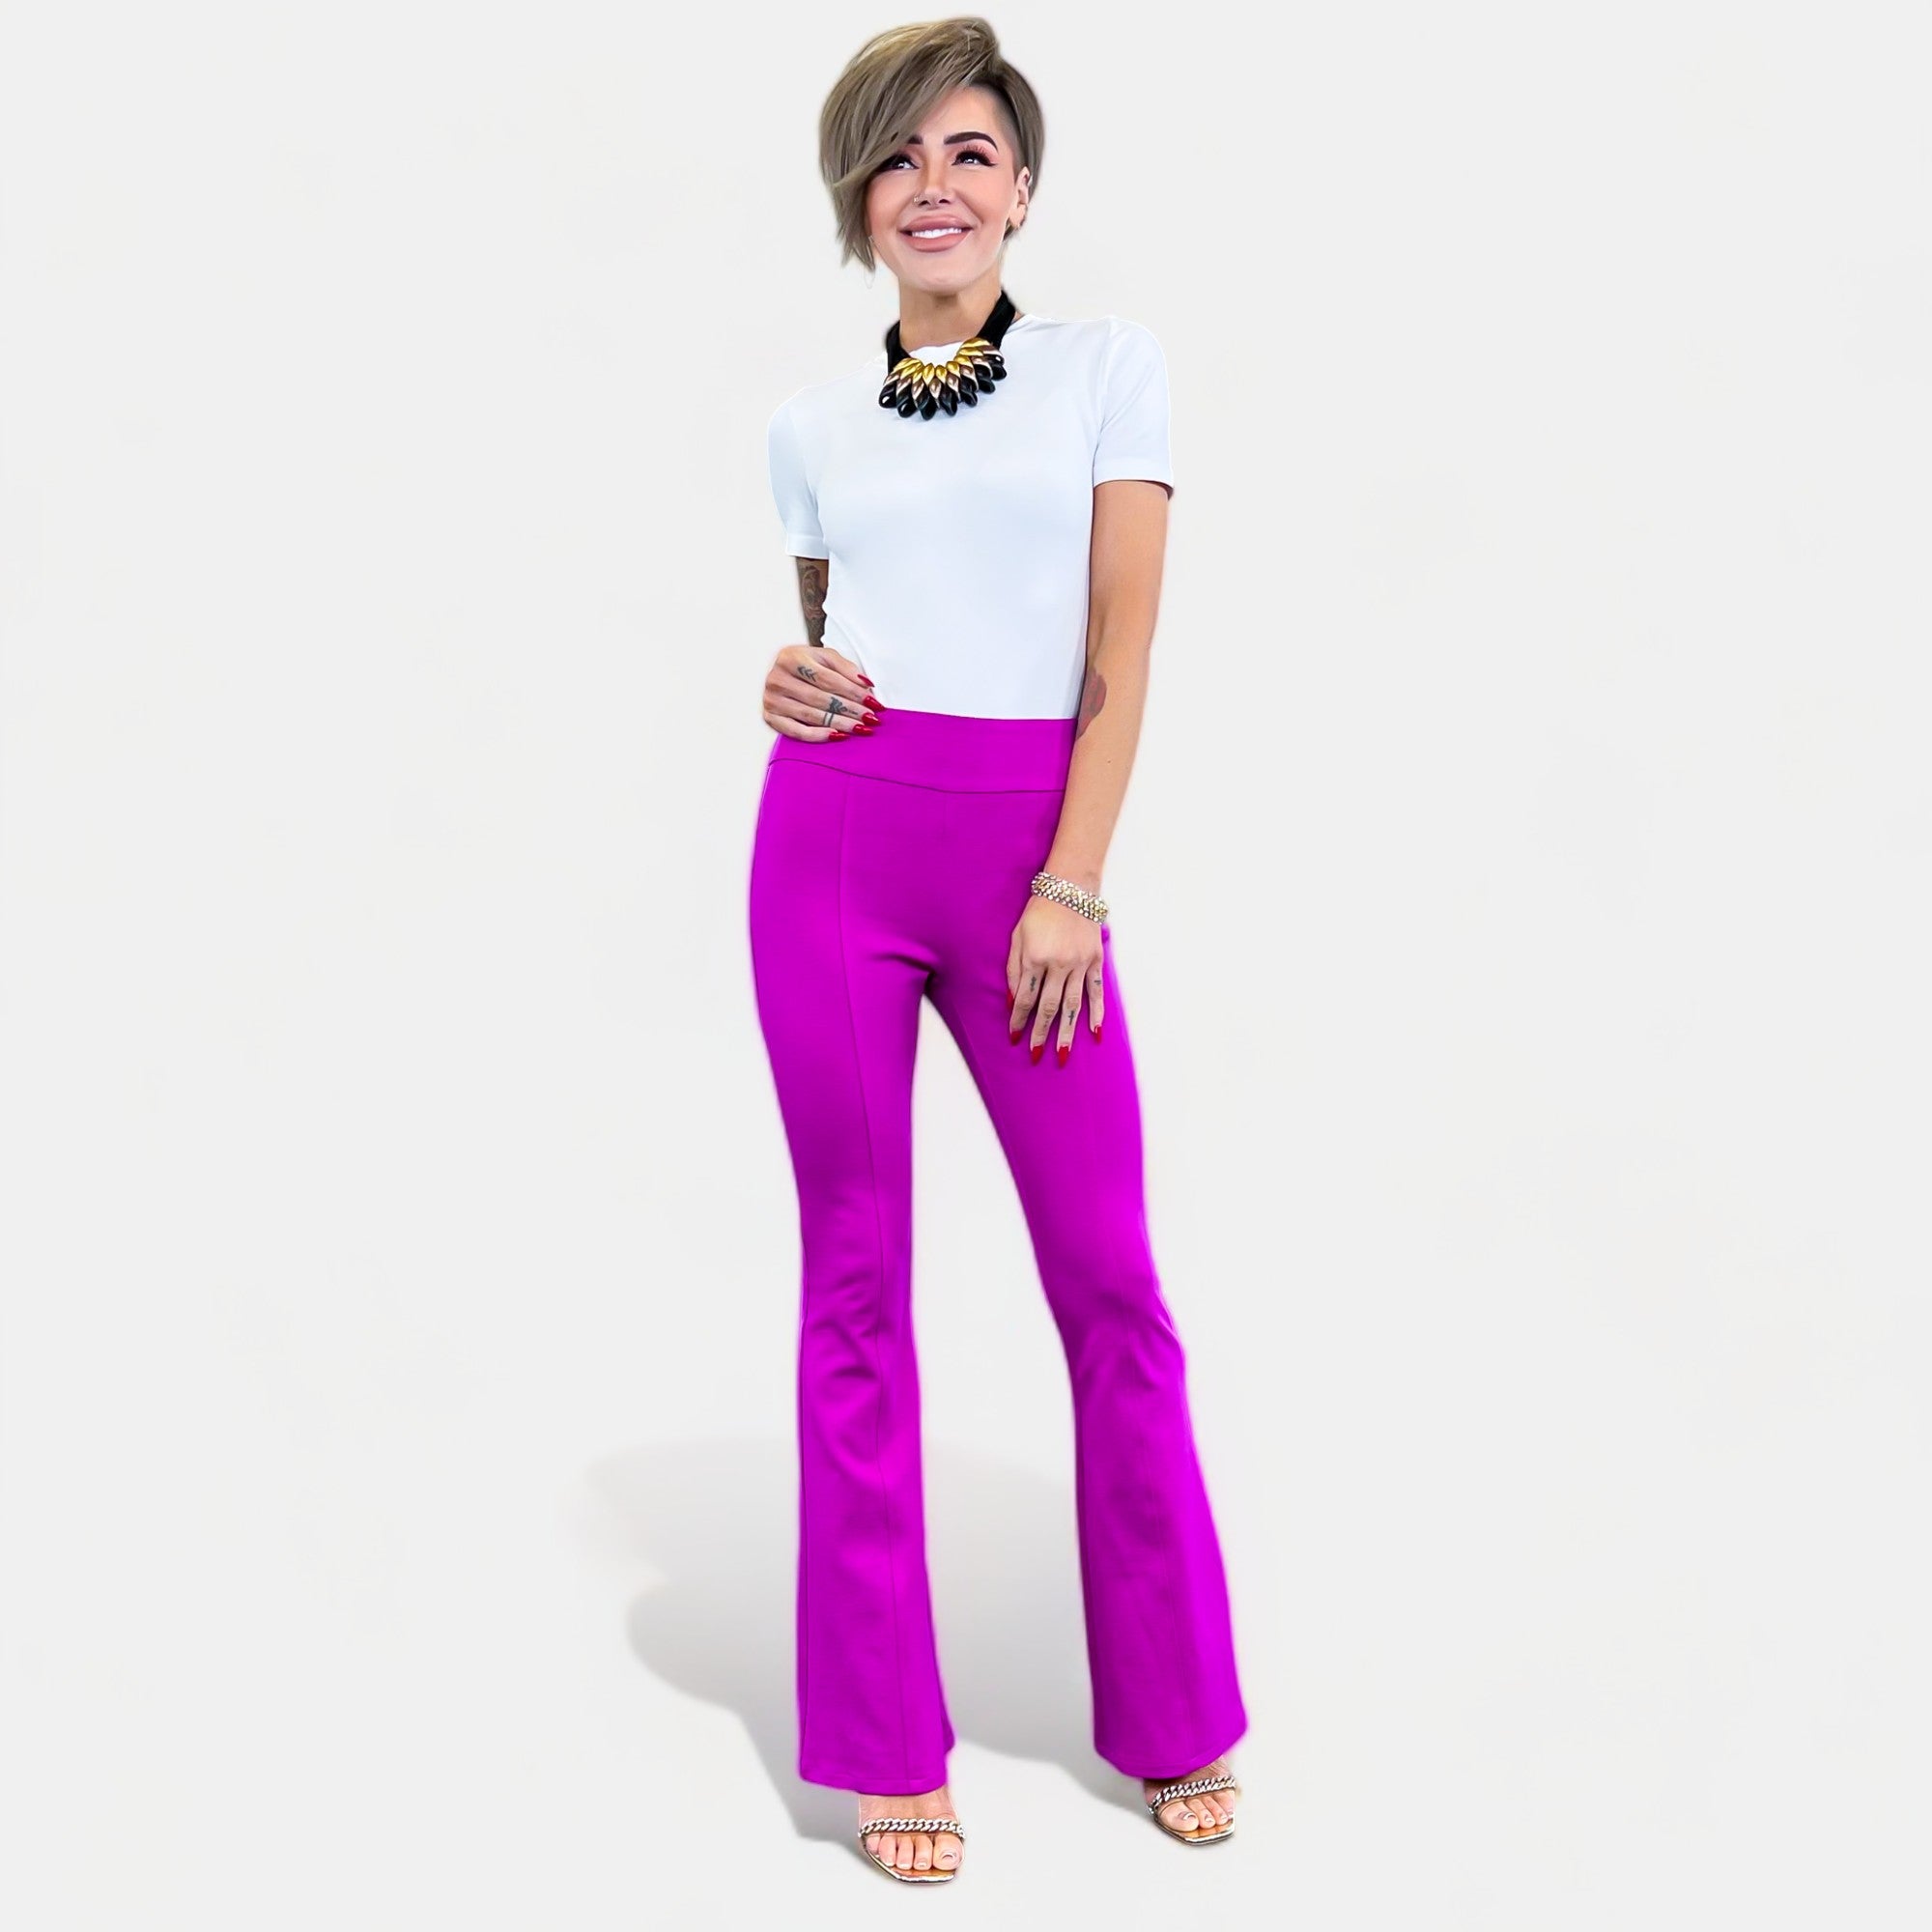 Magenta High Waisted Flare Pants – The ZigZag Stripe